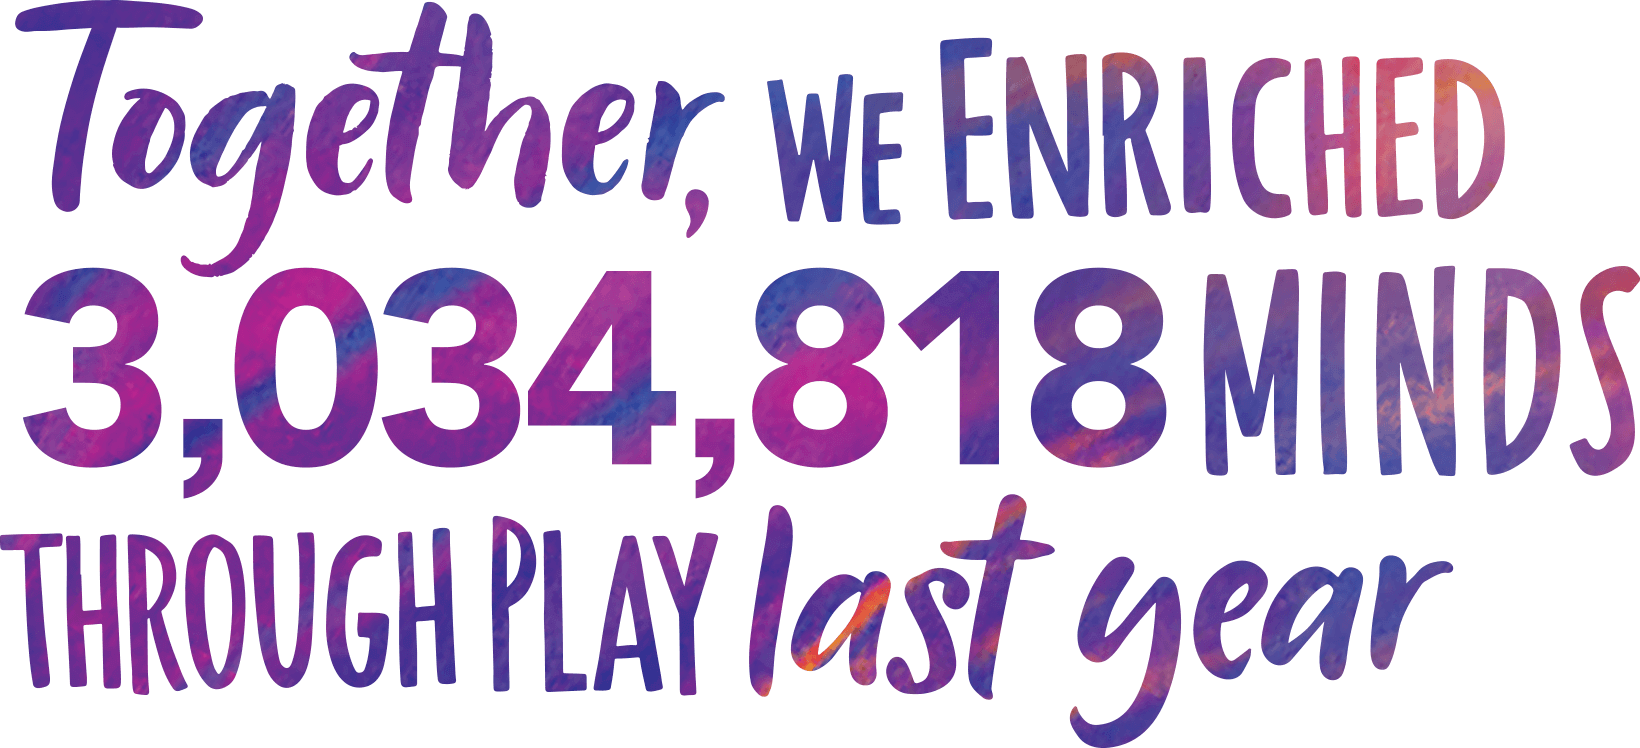 Together, we enriched 3,034,818 minds through play last year